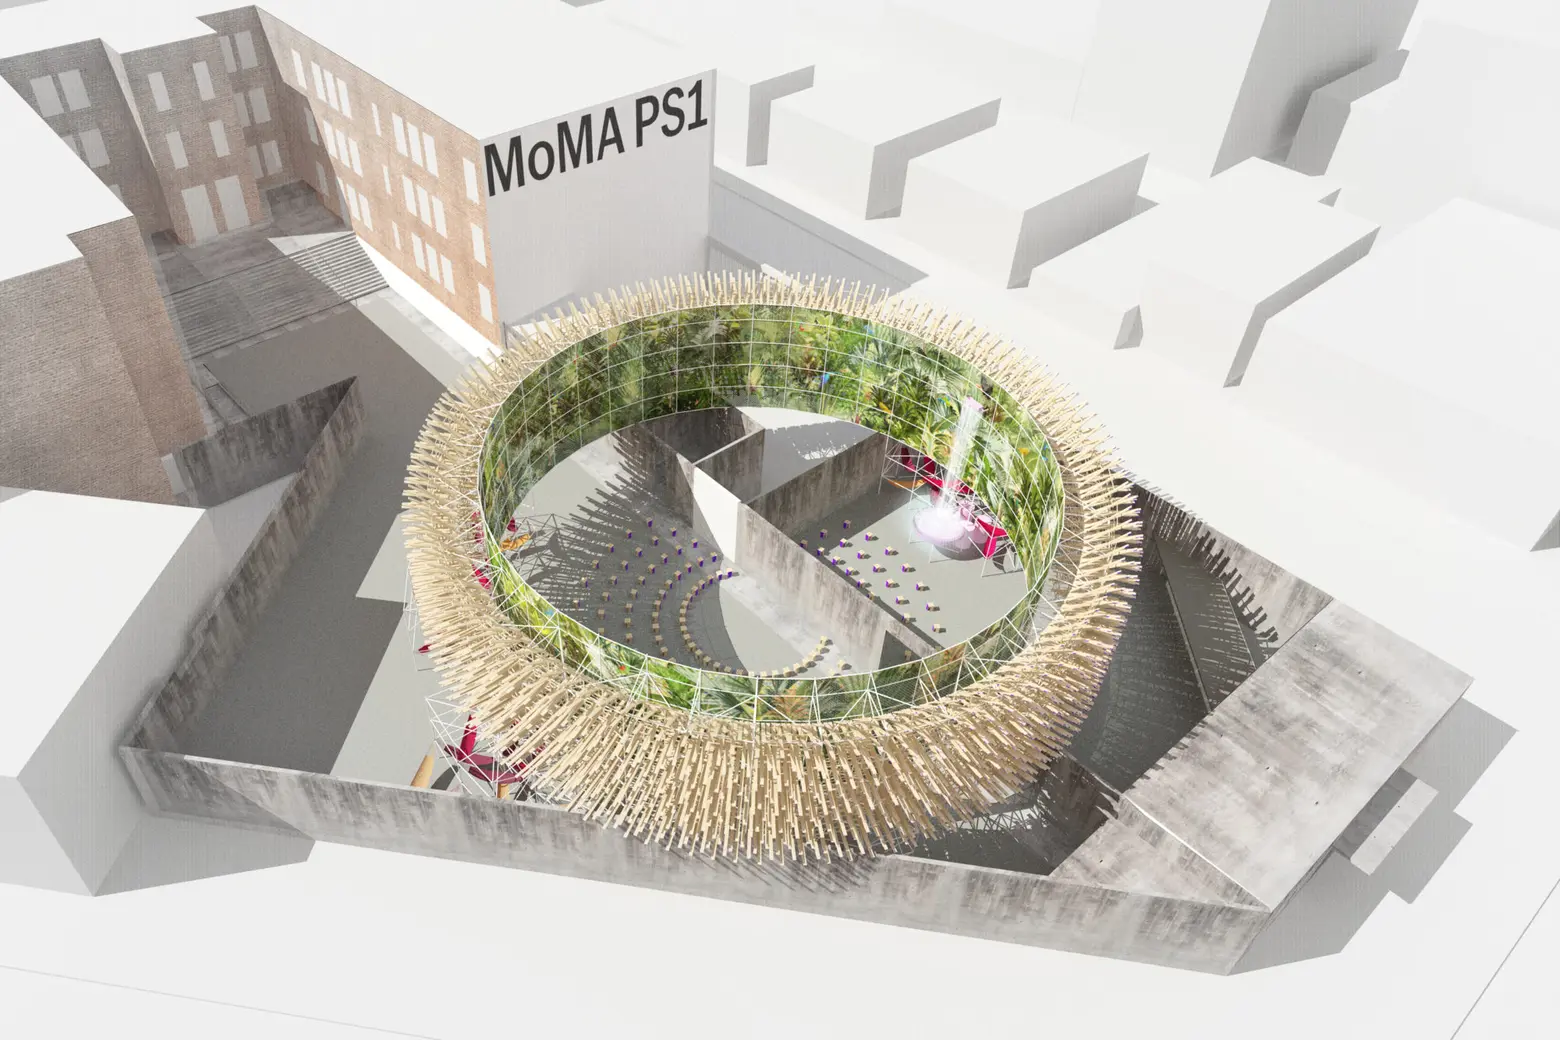 An interactive ‘junglescape’ is coming to the courtyard of MoMA PS1 this summer